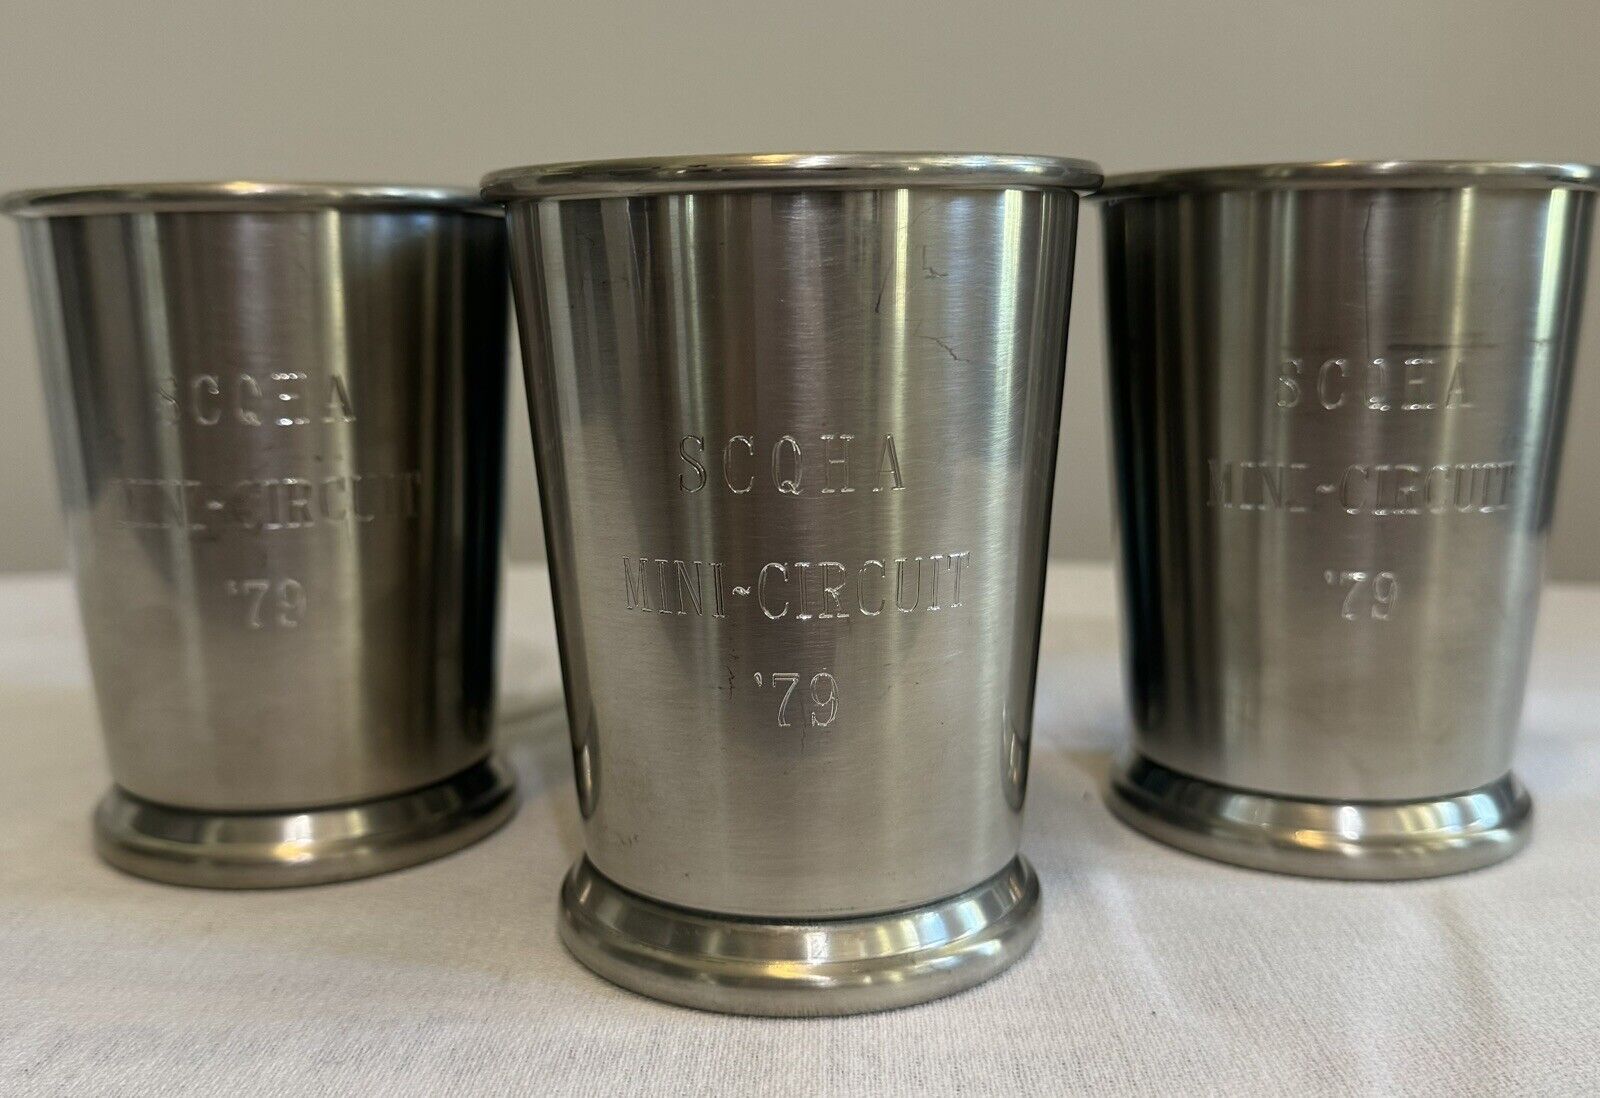 SET OF 4 PEWTER CUPS WITH ENGRAVING FROM HORSE SHOWS CIRCA 70s